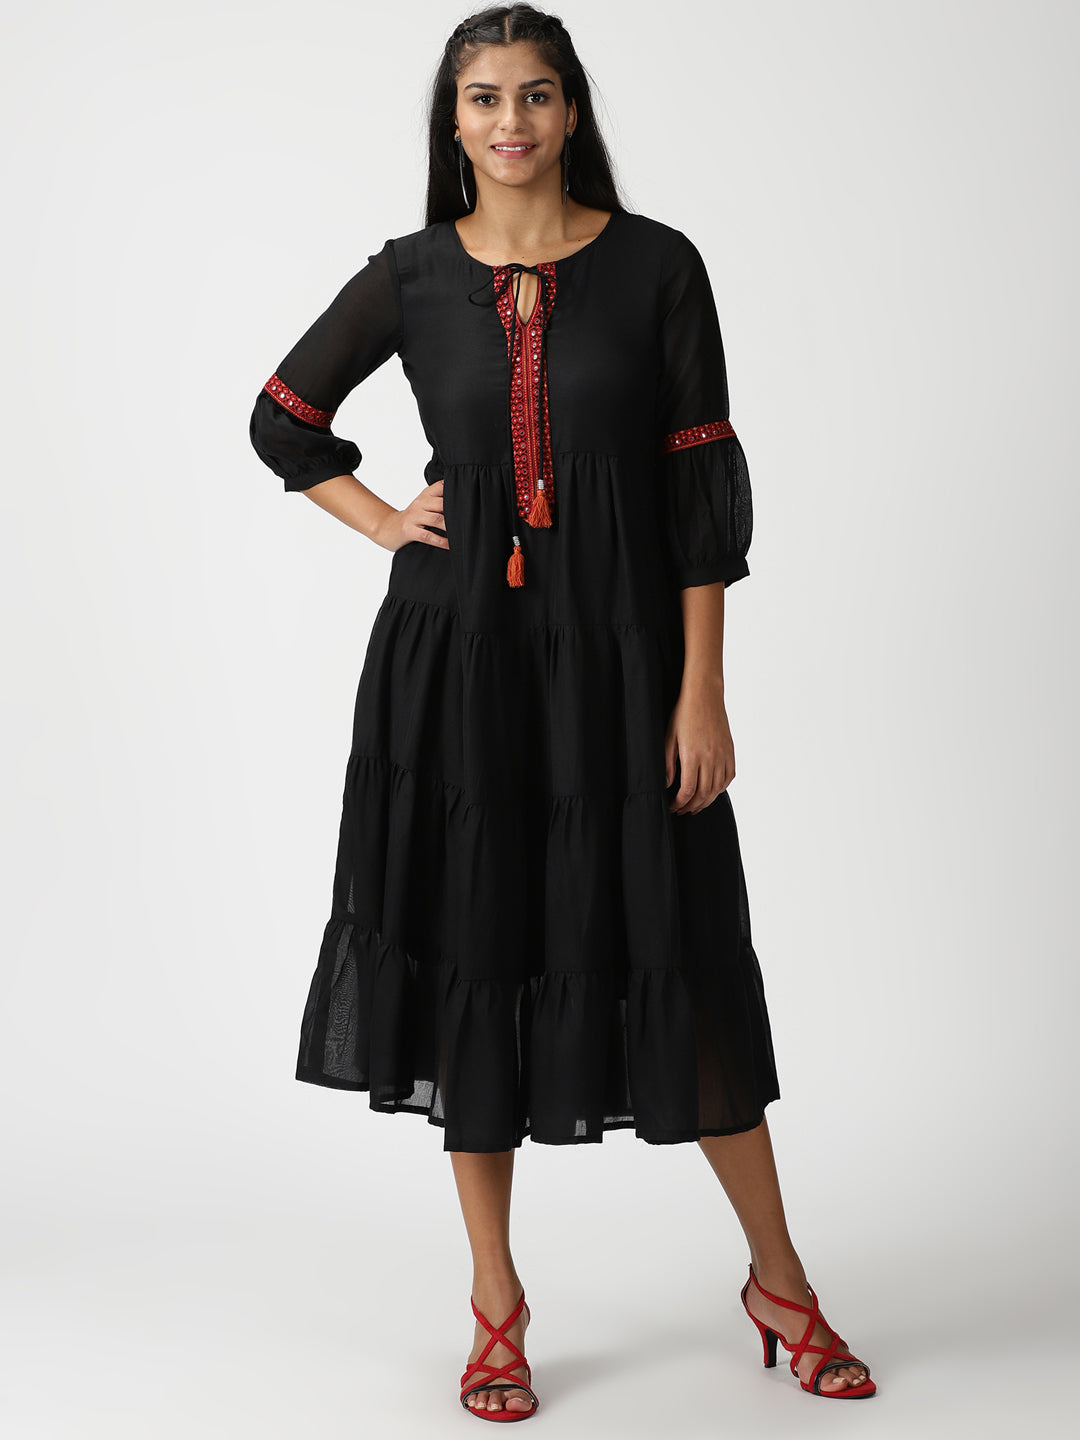 Black Boho Tiered Midi Dress with Embroidered Details